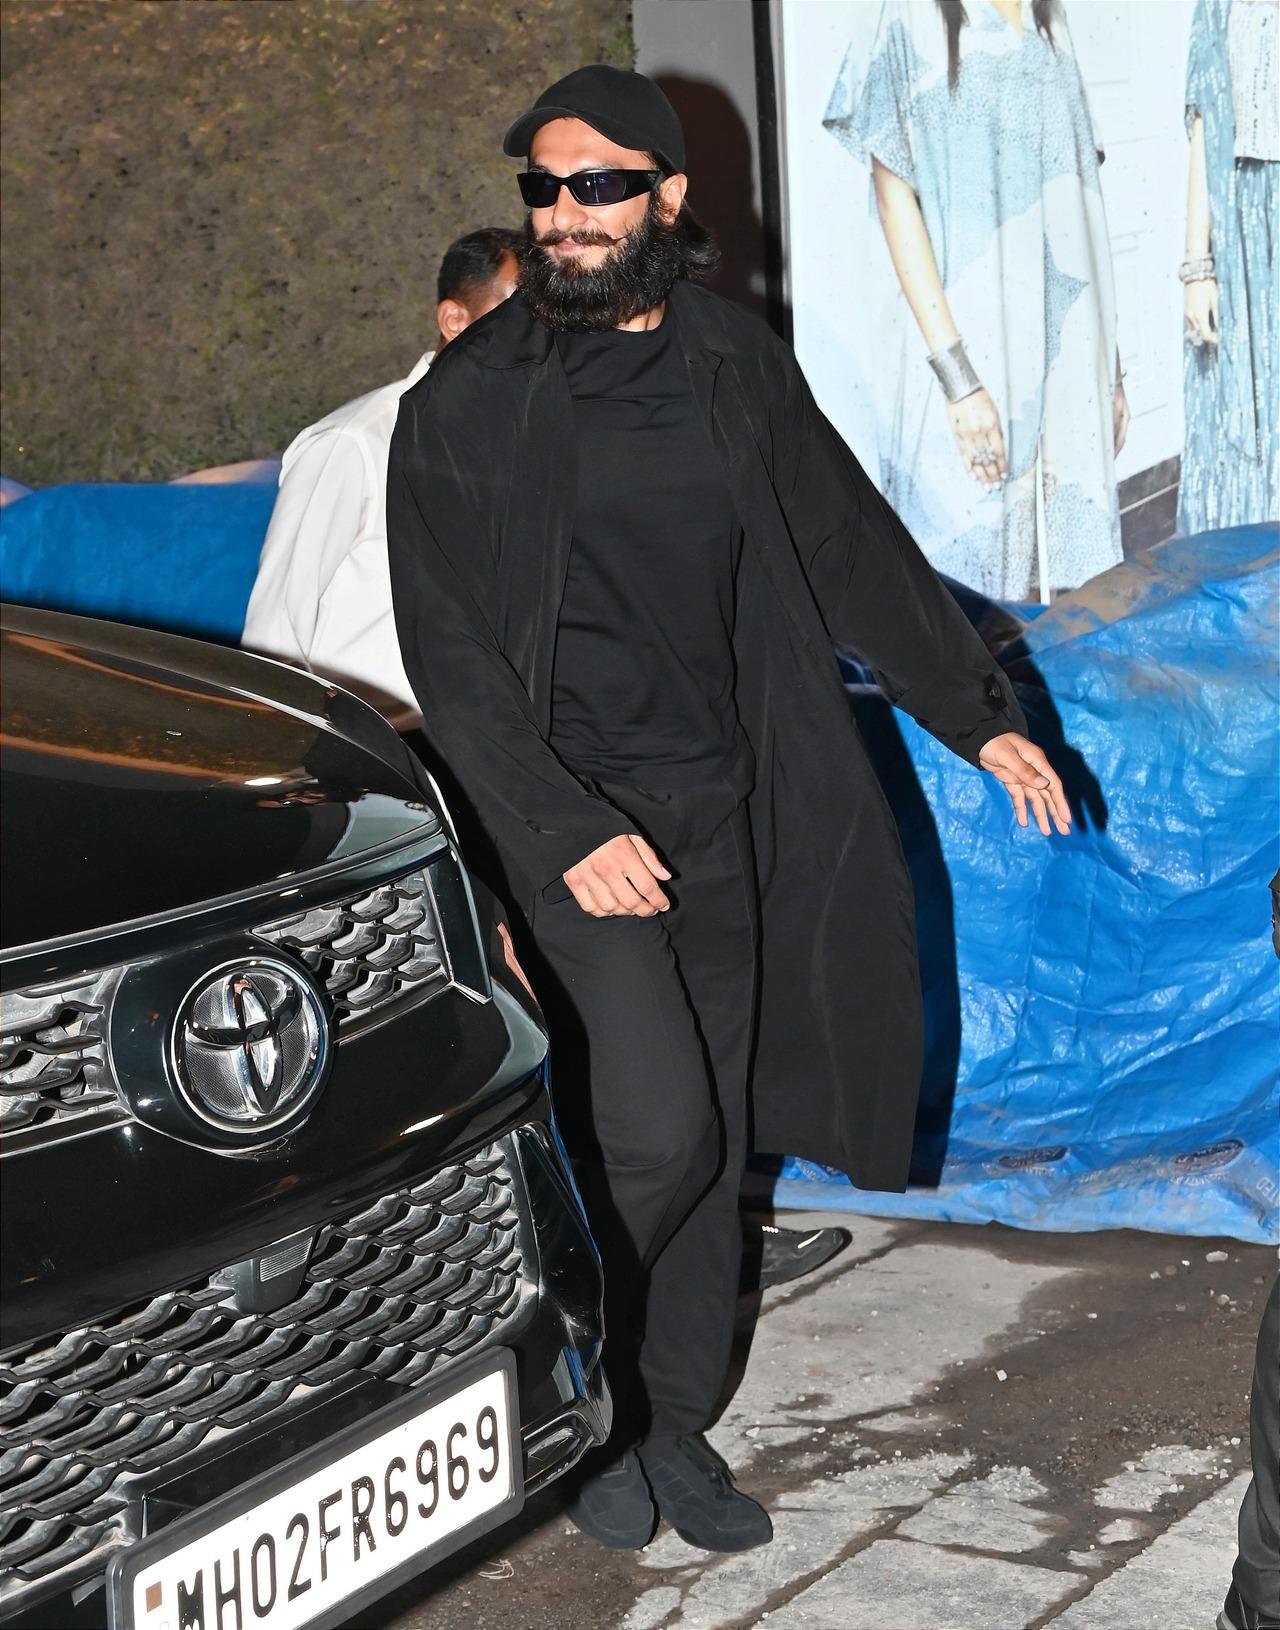 Ranveer on the other hand went for an all-black ensemble including a cap and sunglasses as he sported a heavy bearded look. 